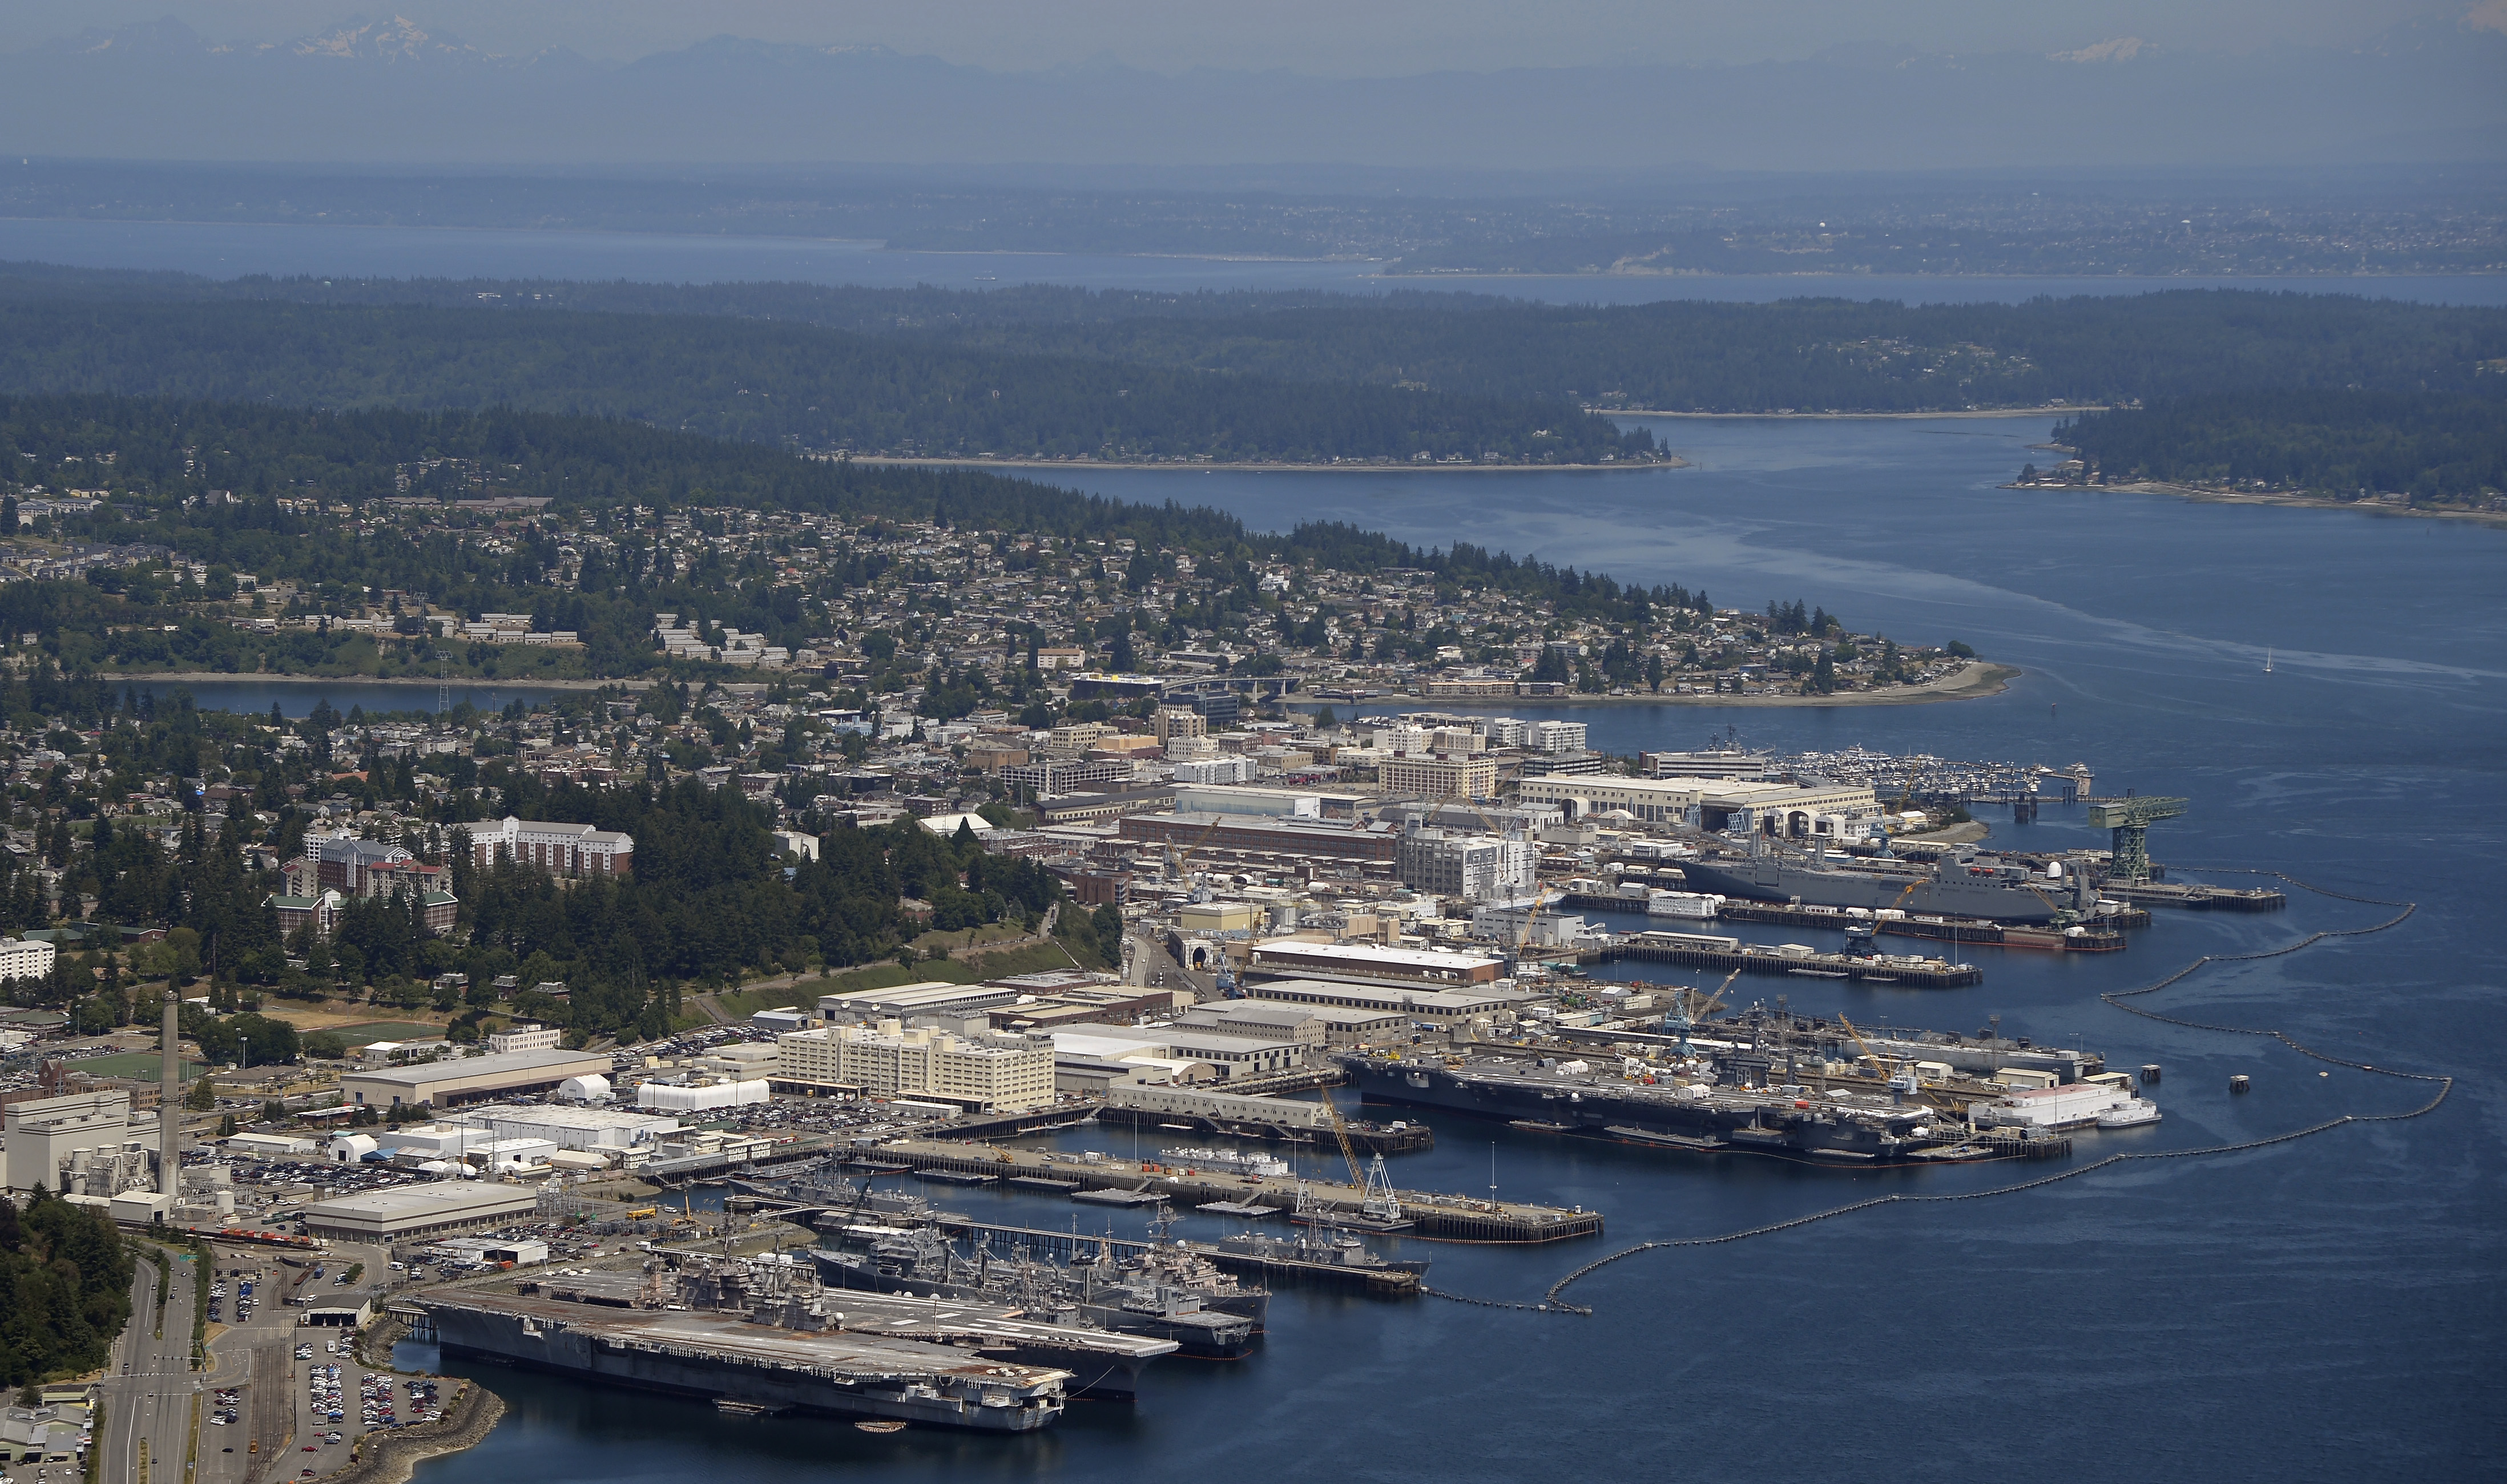 Naval Base Kitsap and the Port of Bremerton are seen in this aerial photo. A special tour of the 'USS John C. Stennis' is available for AOPA Fly-In at Bremerton, Washington, attendees. Photo by David Tulis.